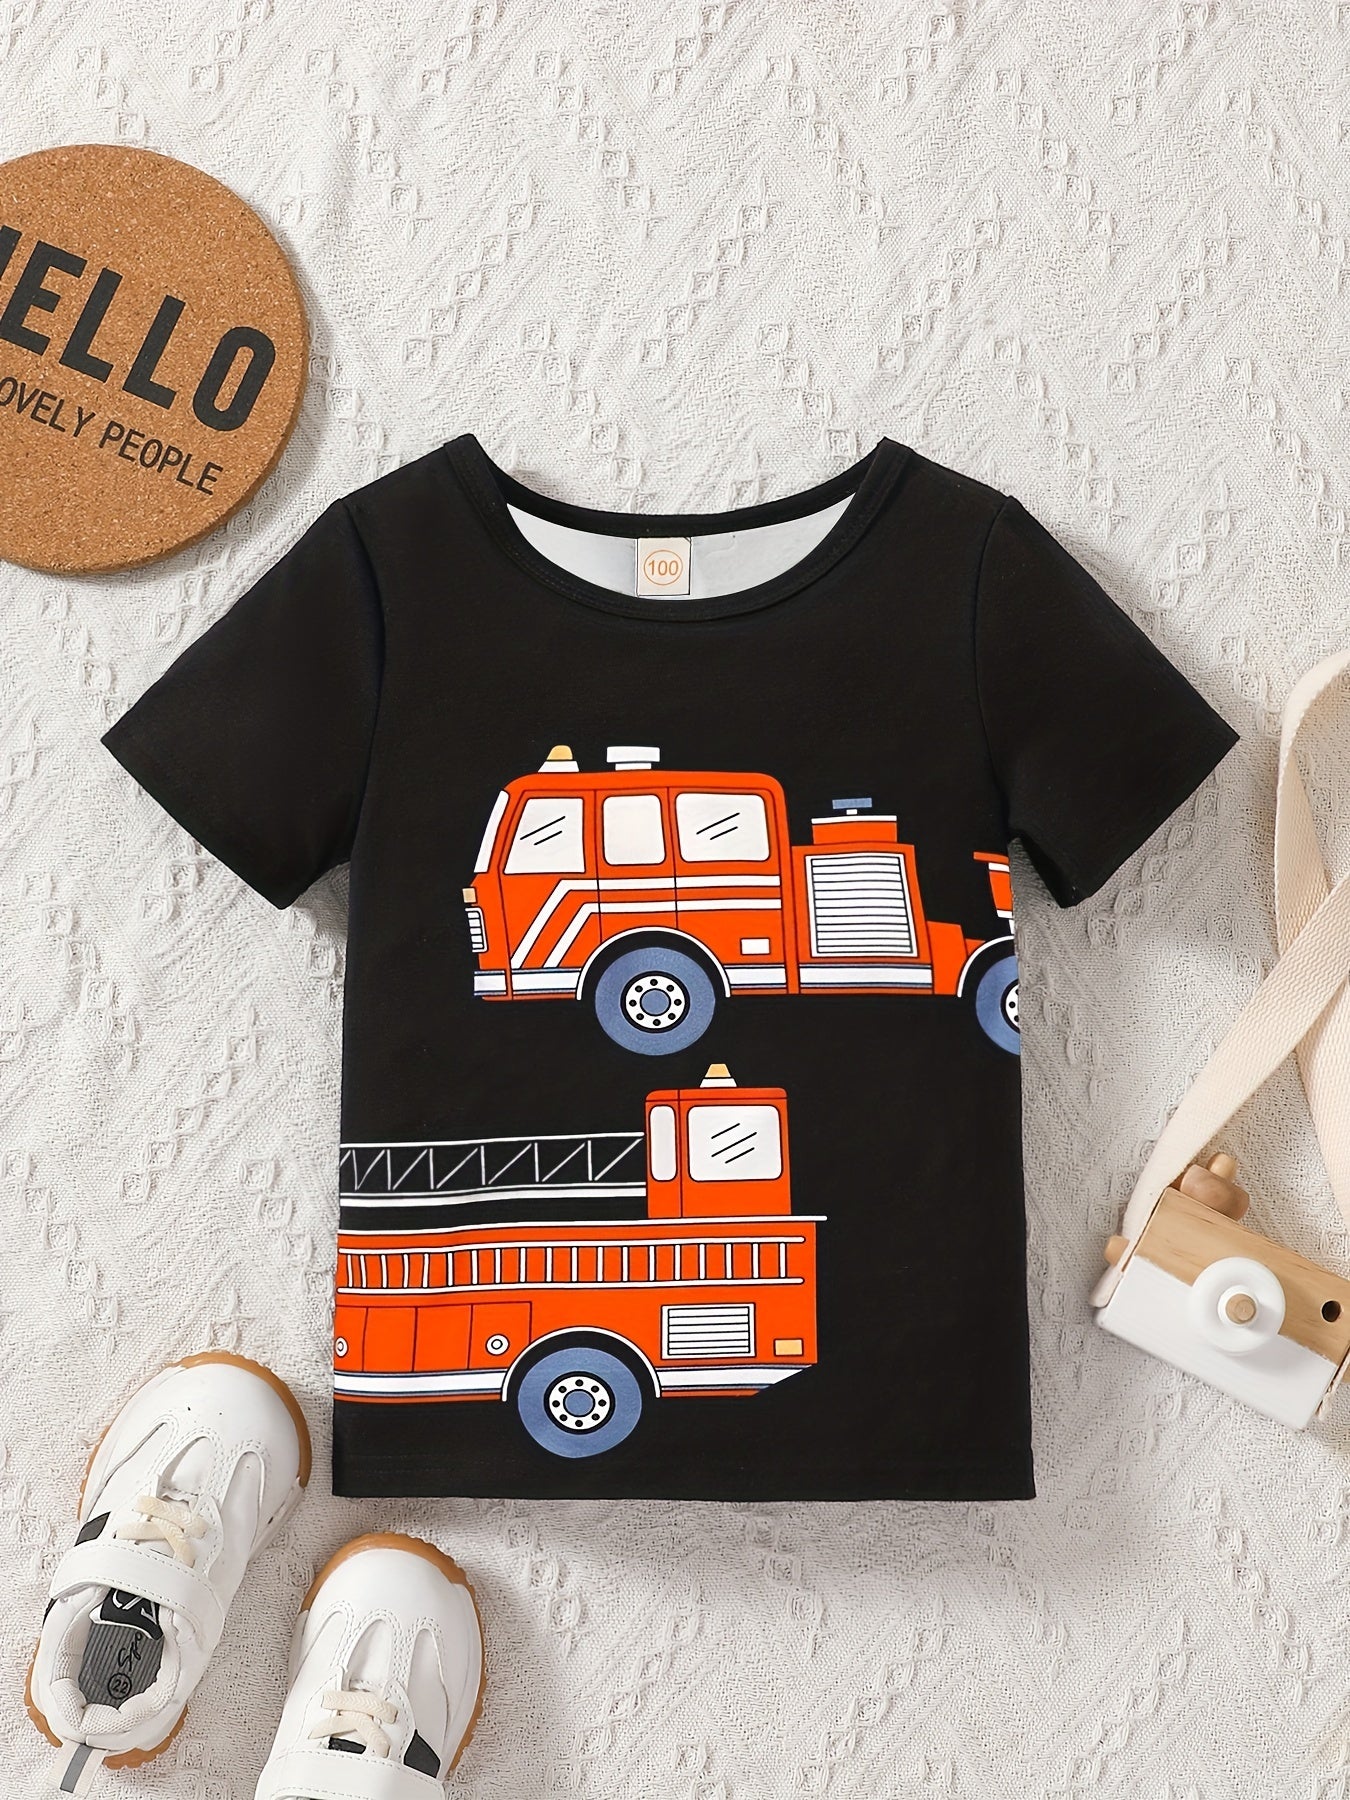 Cartoon Fire Truck Graphic Round Neck T-shirt Tees Tops Casual Soft Comfortable Boys And Girls Summer Clothes